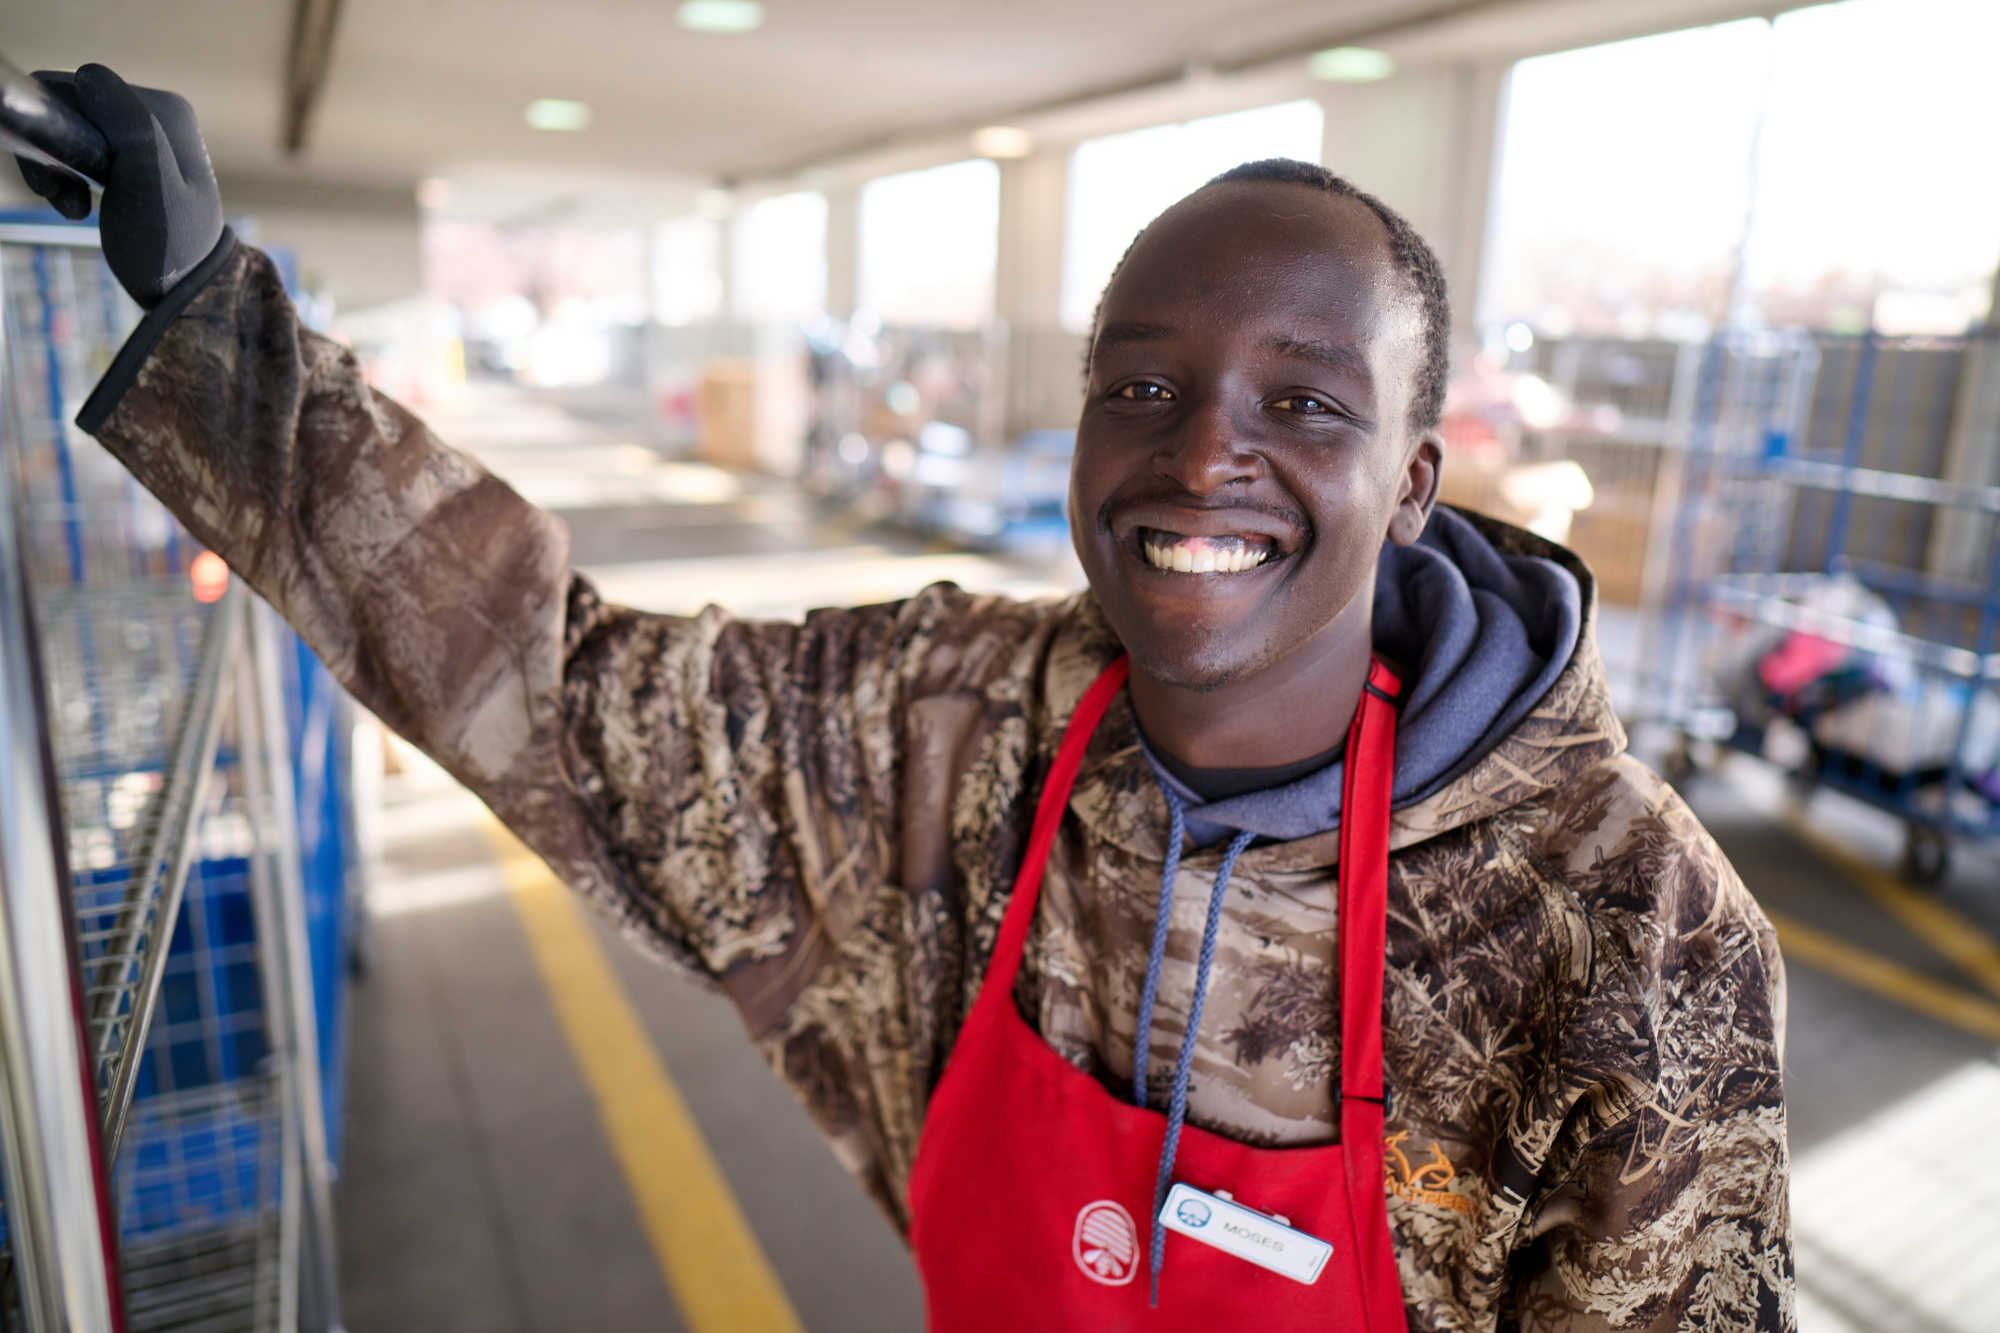 Thrift store worker smiles as he helps with unloading donations from cars